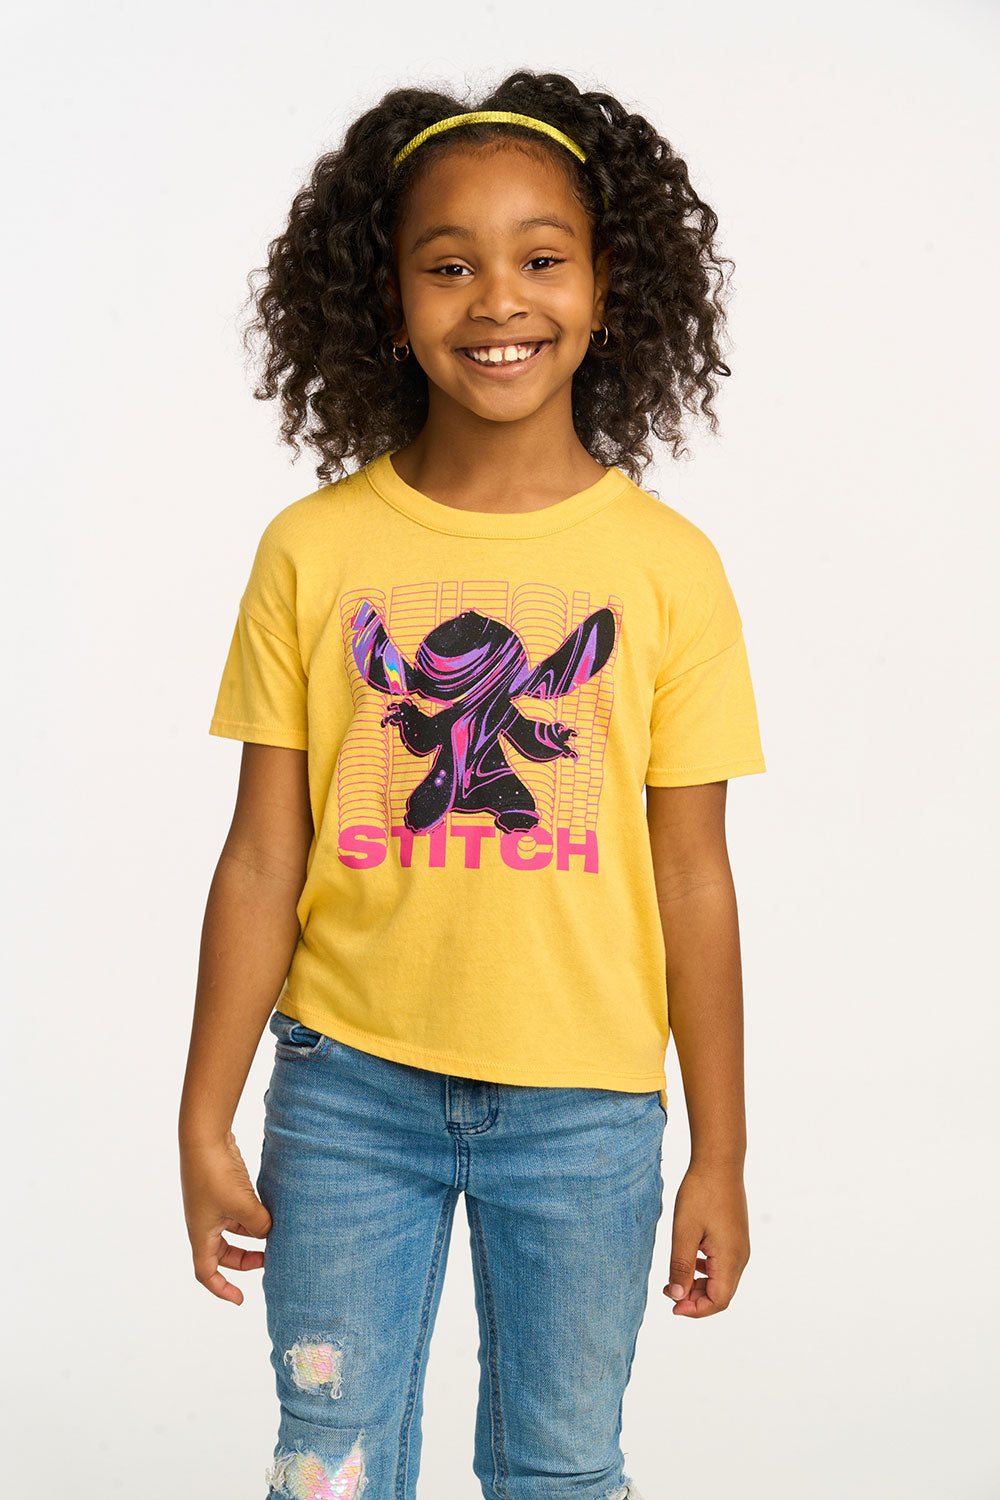 Disney Stitch "Space Age" Tee GIRLS chaserbrand